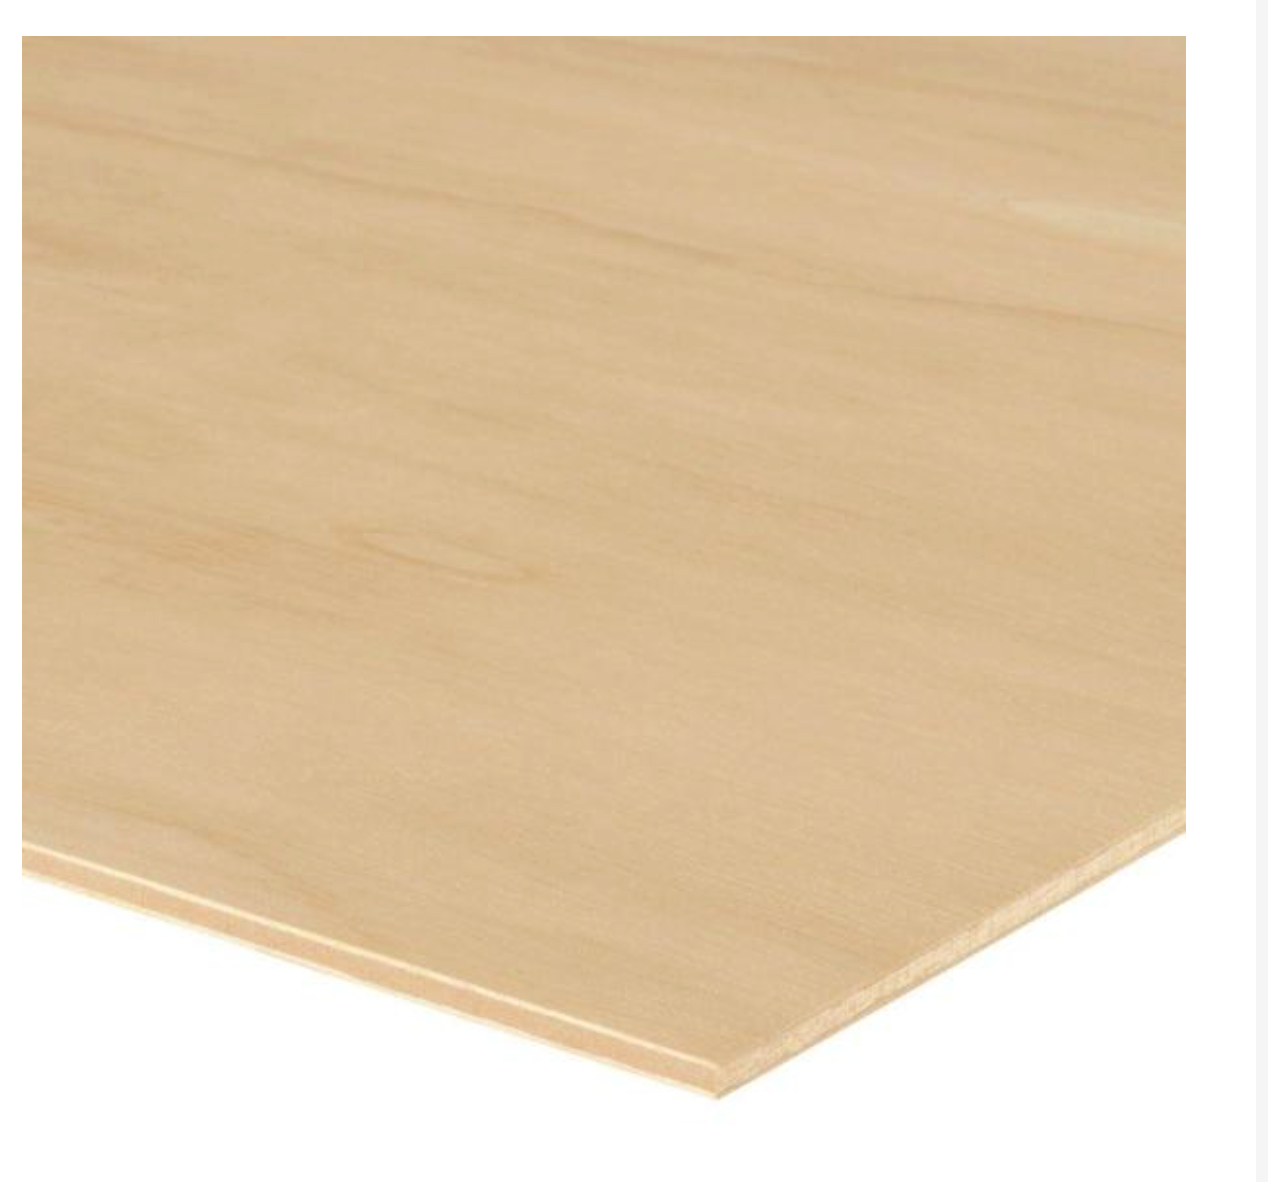 5.2mm - Sande Plywood (1/4 in. Category Common: 1/4 in. x 4 ft. x 8 ft.; Actual: 0.205 in. x 48 in. x 96 in.)